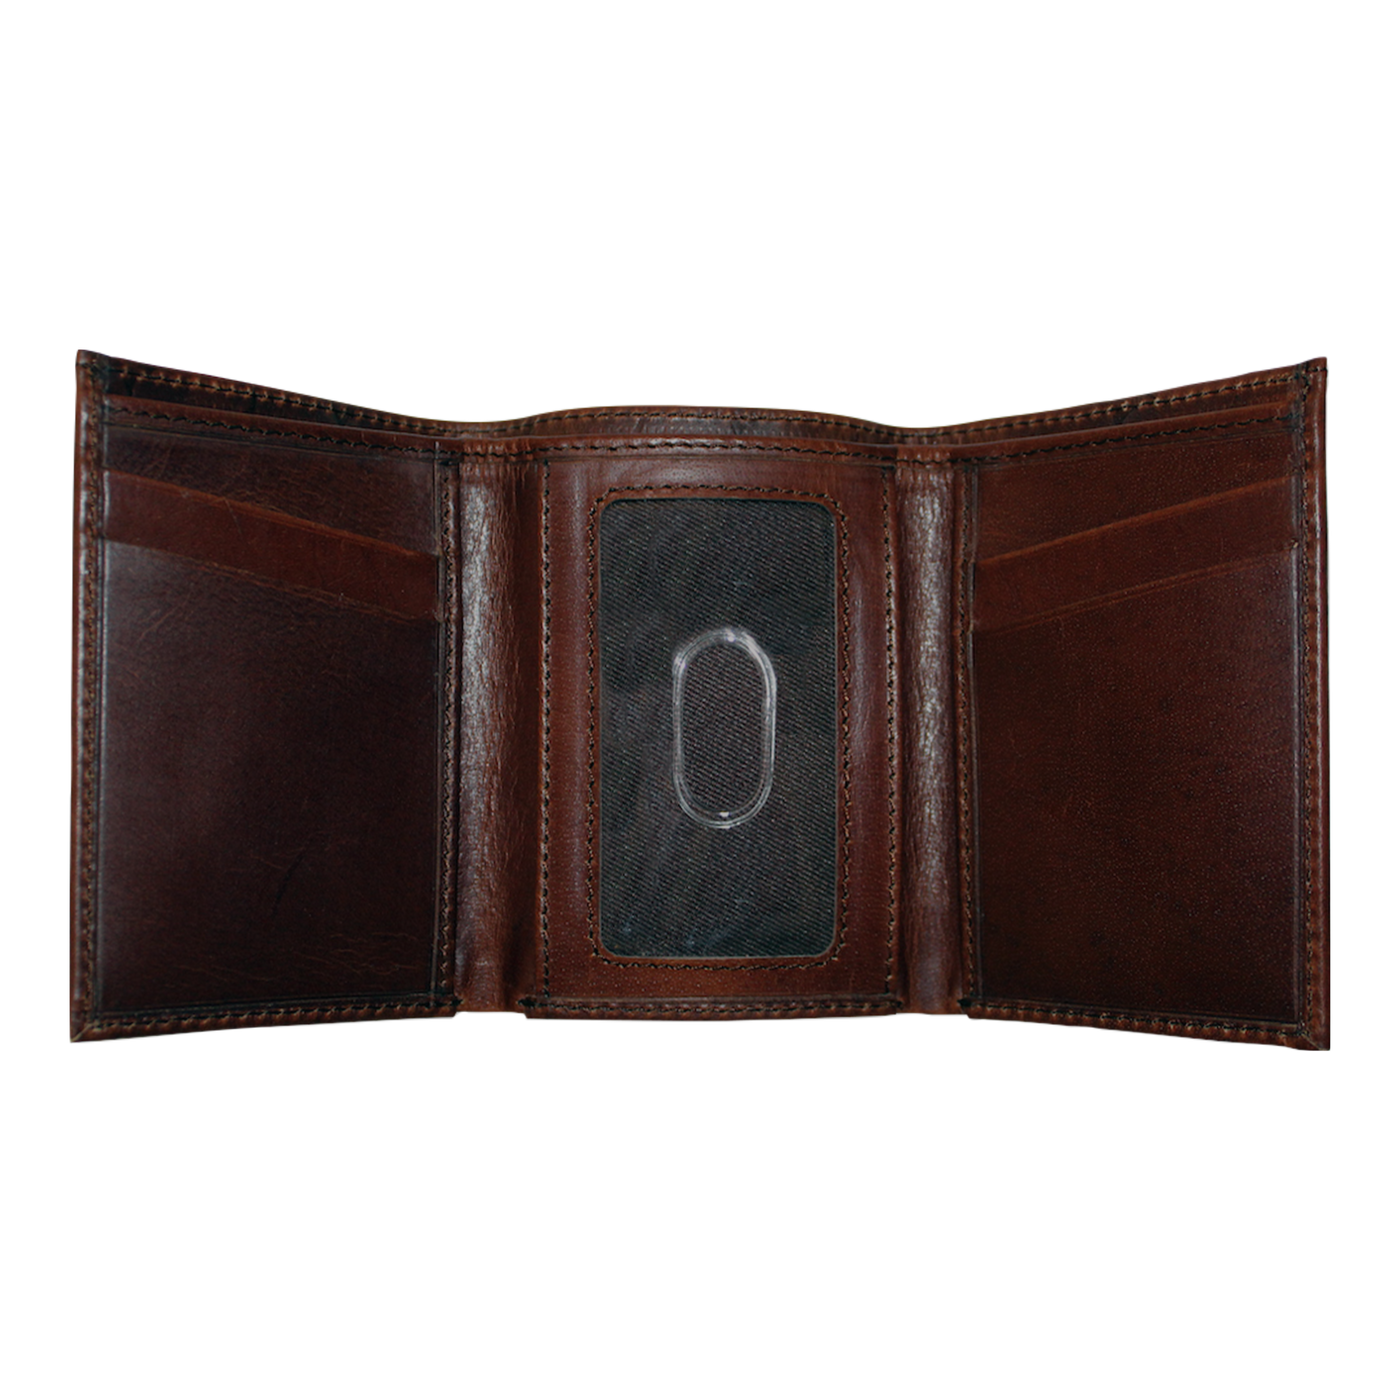 Nothing speaks class more than the Pursuit Trifold Bass Wallet, constructed with premier full grain leather, hand-oiled Buffalo finish, and a beautiful debossed bass logo throughout the exterior. Great piece for any collection! 4 Card Slots 2 Storage Pockets ID Window Bill Compartment Modern Style & Design Dimensions: 3.37"L x 4"H RFID Protection Color: Brown